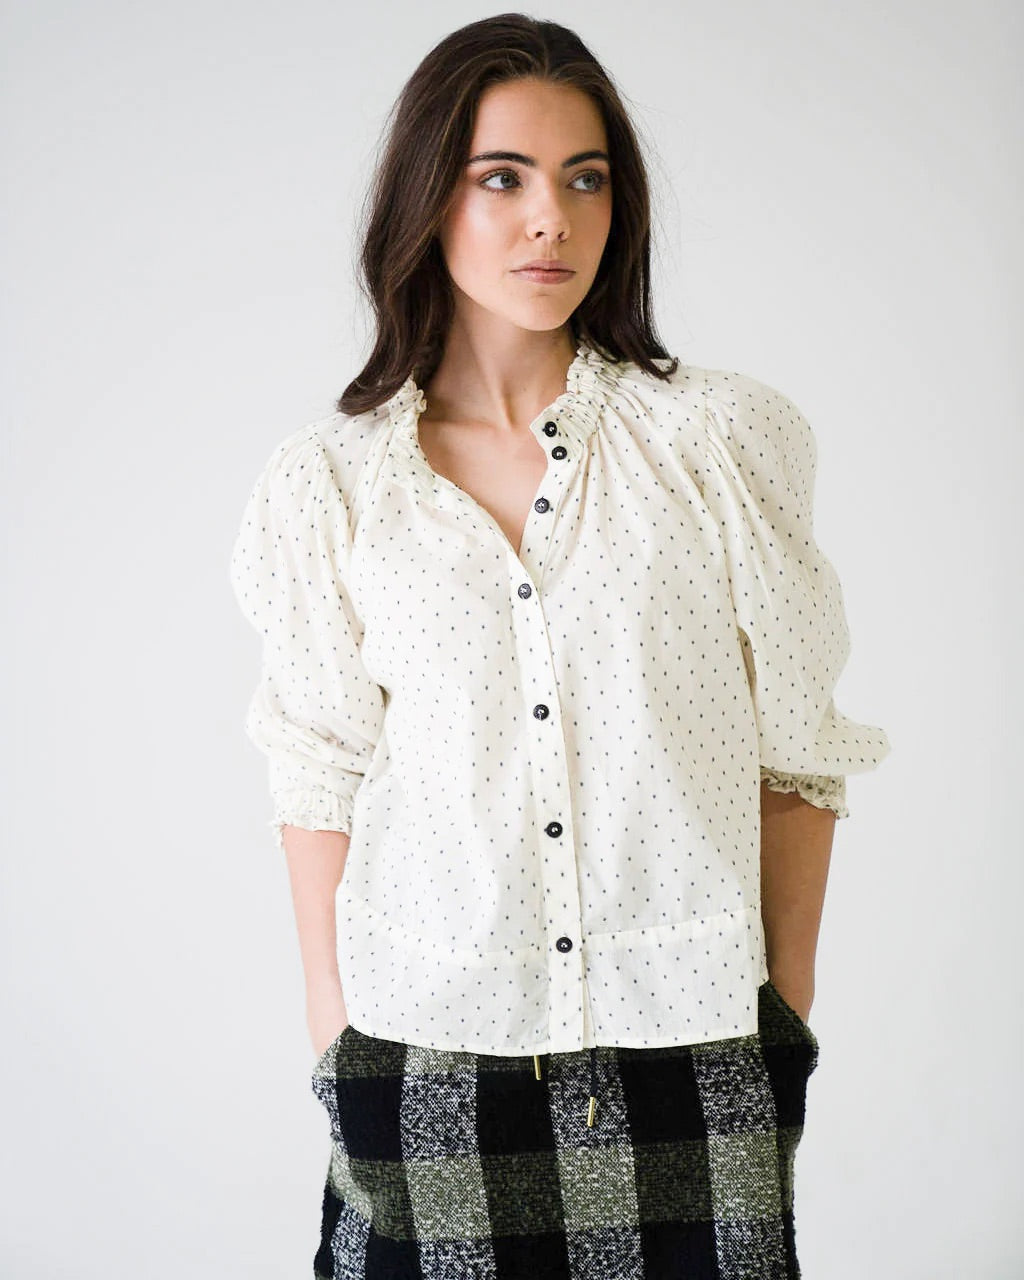 Never A Wallflower Elastic Collar Top in White with Black Swiss Dot